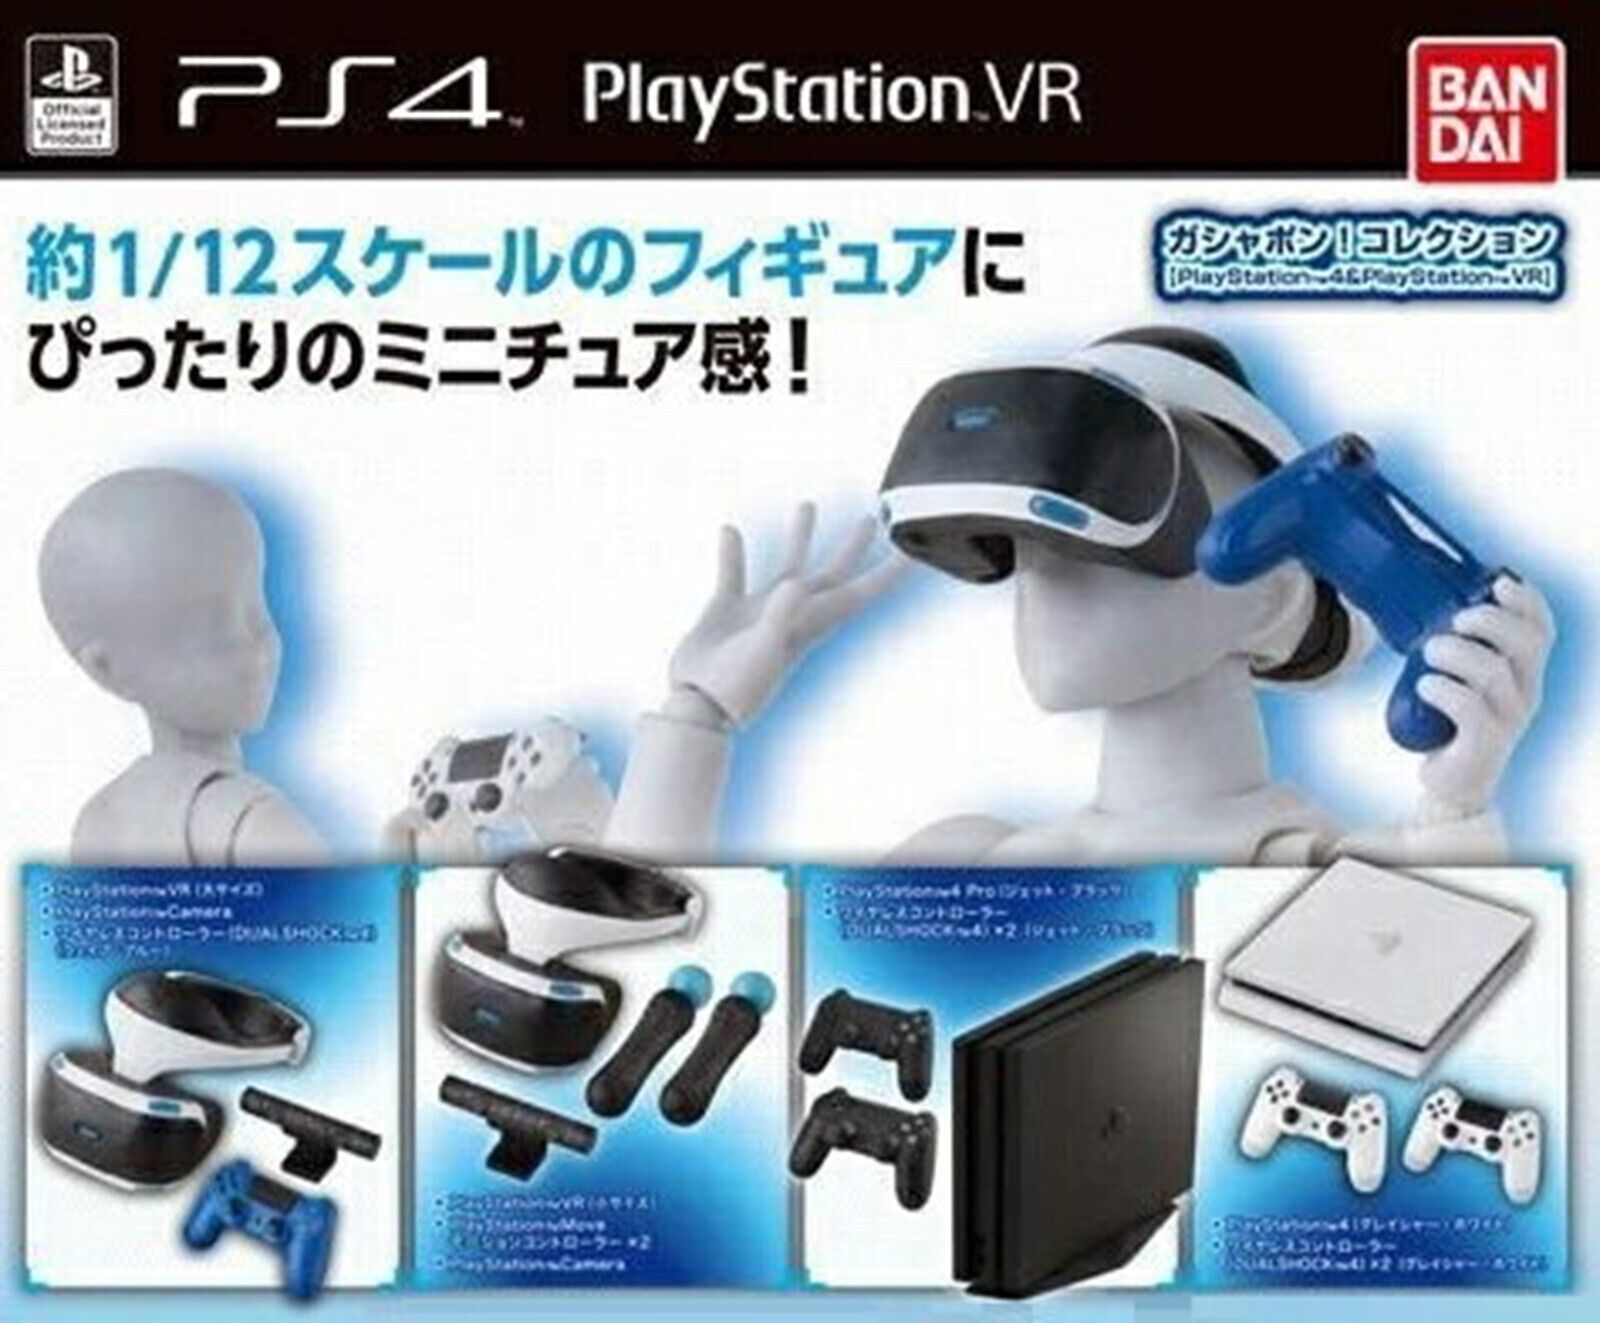 PlayStation 4 & PlayStation VR / Capsule Toy All 4 types set Full